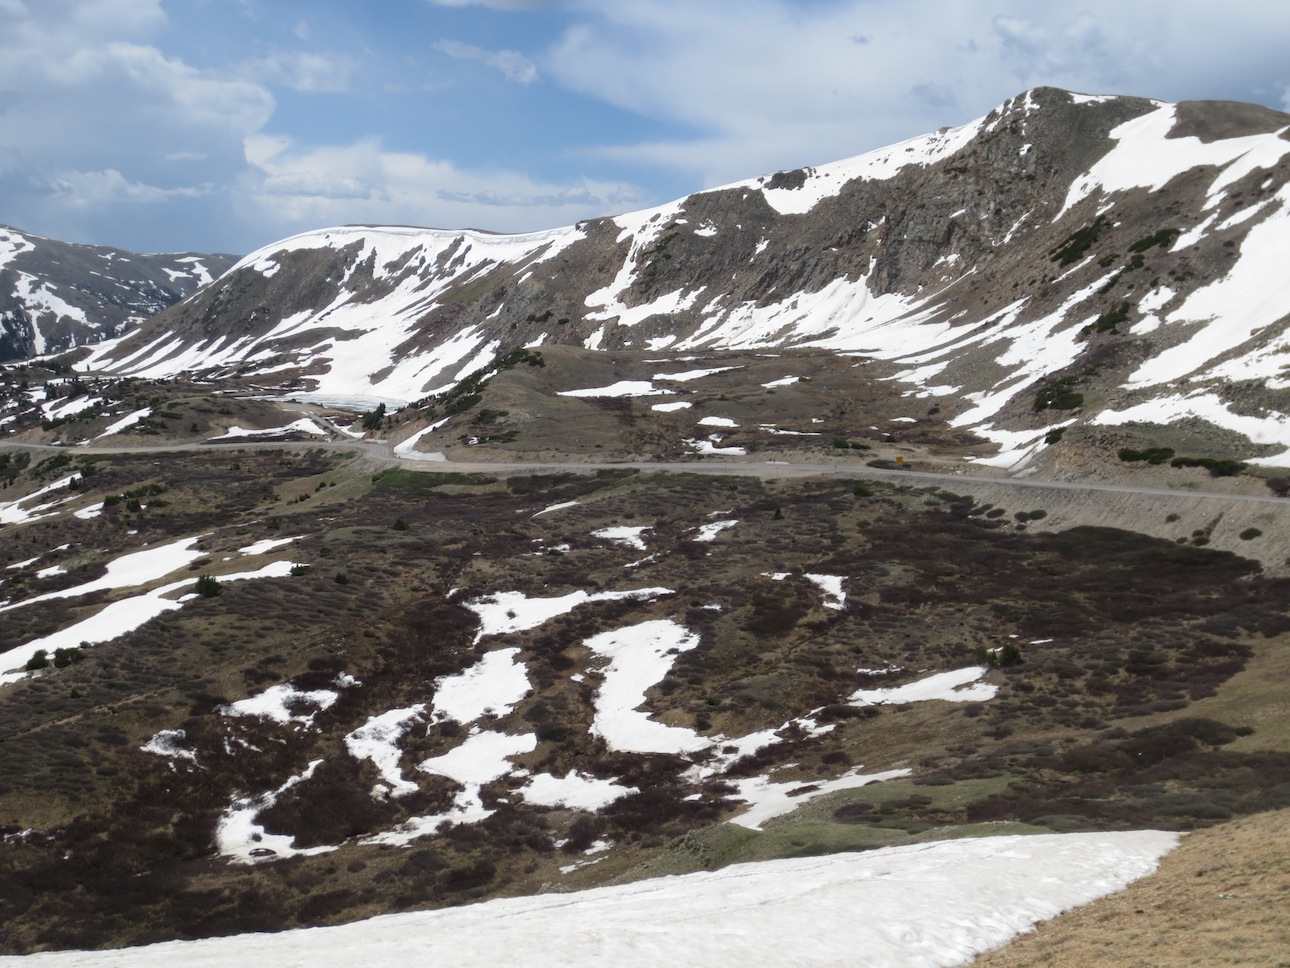 Another shot of the Winding road out of Loveland Pass.